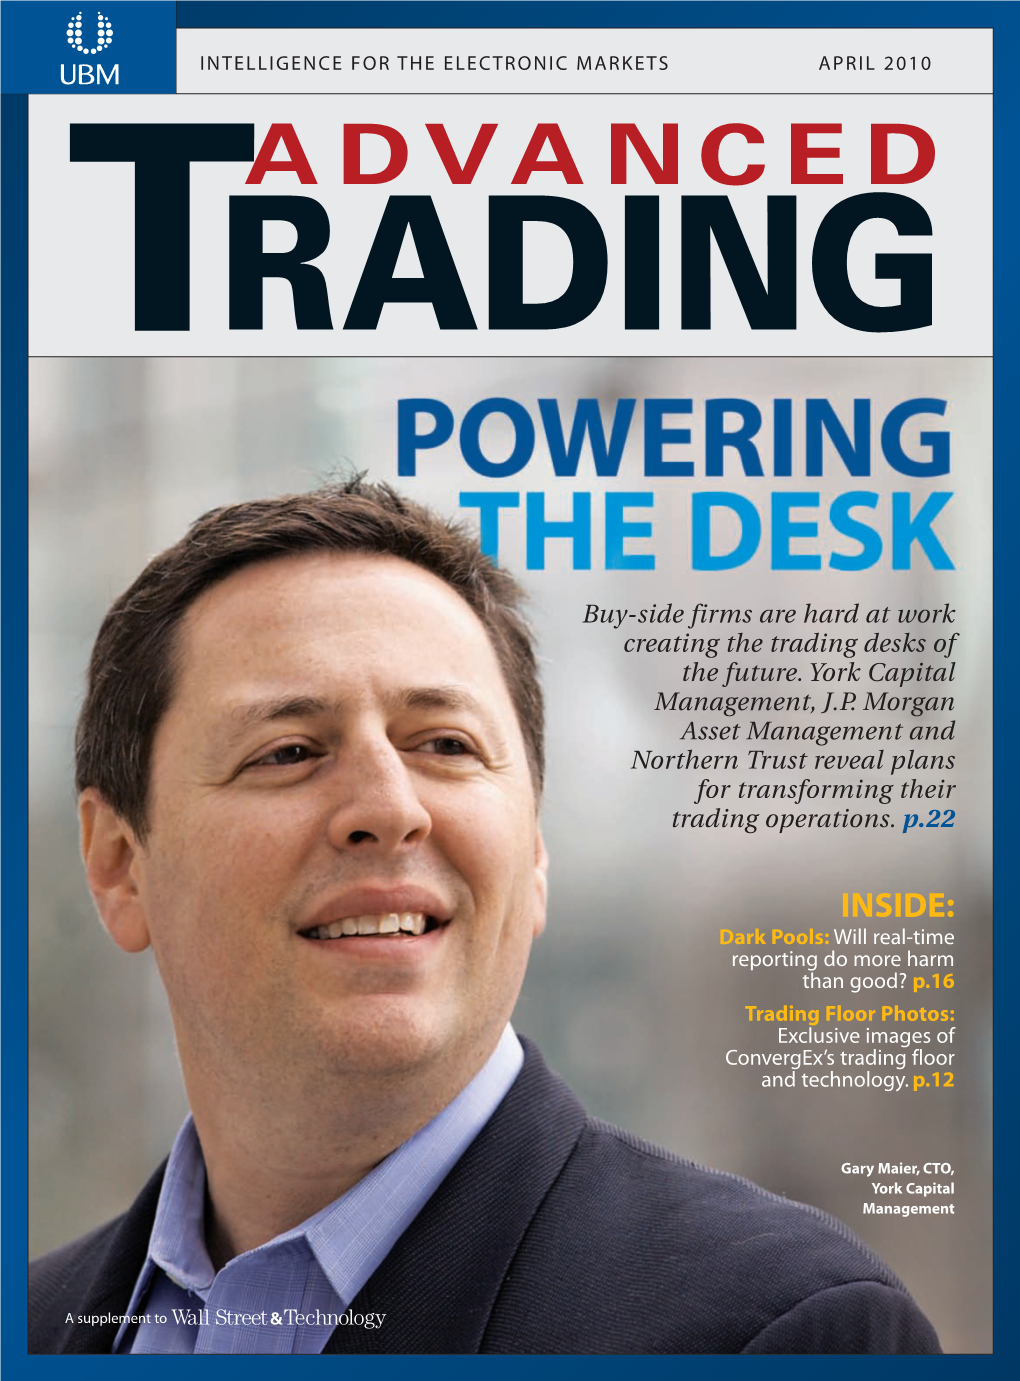 INSIDE: Dark Pools: Will Real-Time Reporting Do More Harm Than Good? P.16 Trading Floor Photos: Exclusive Images of Convergex’S Trading Floor and Technology